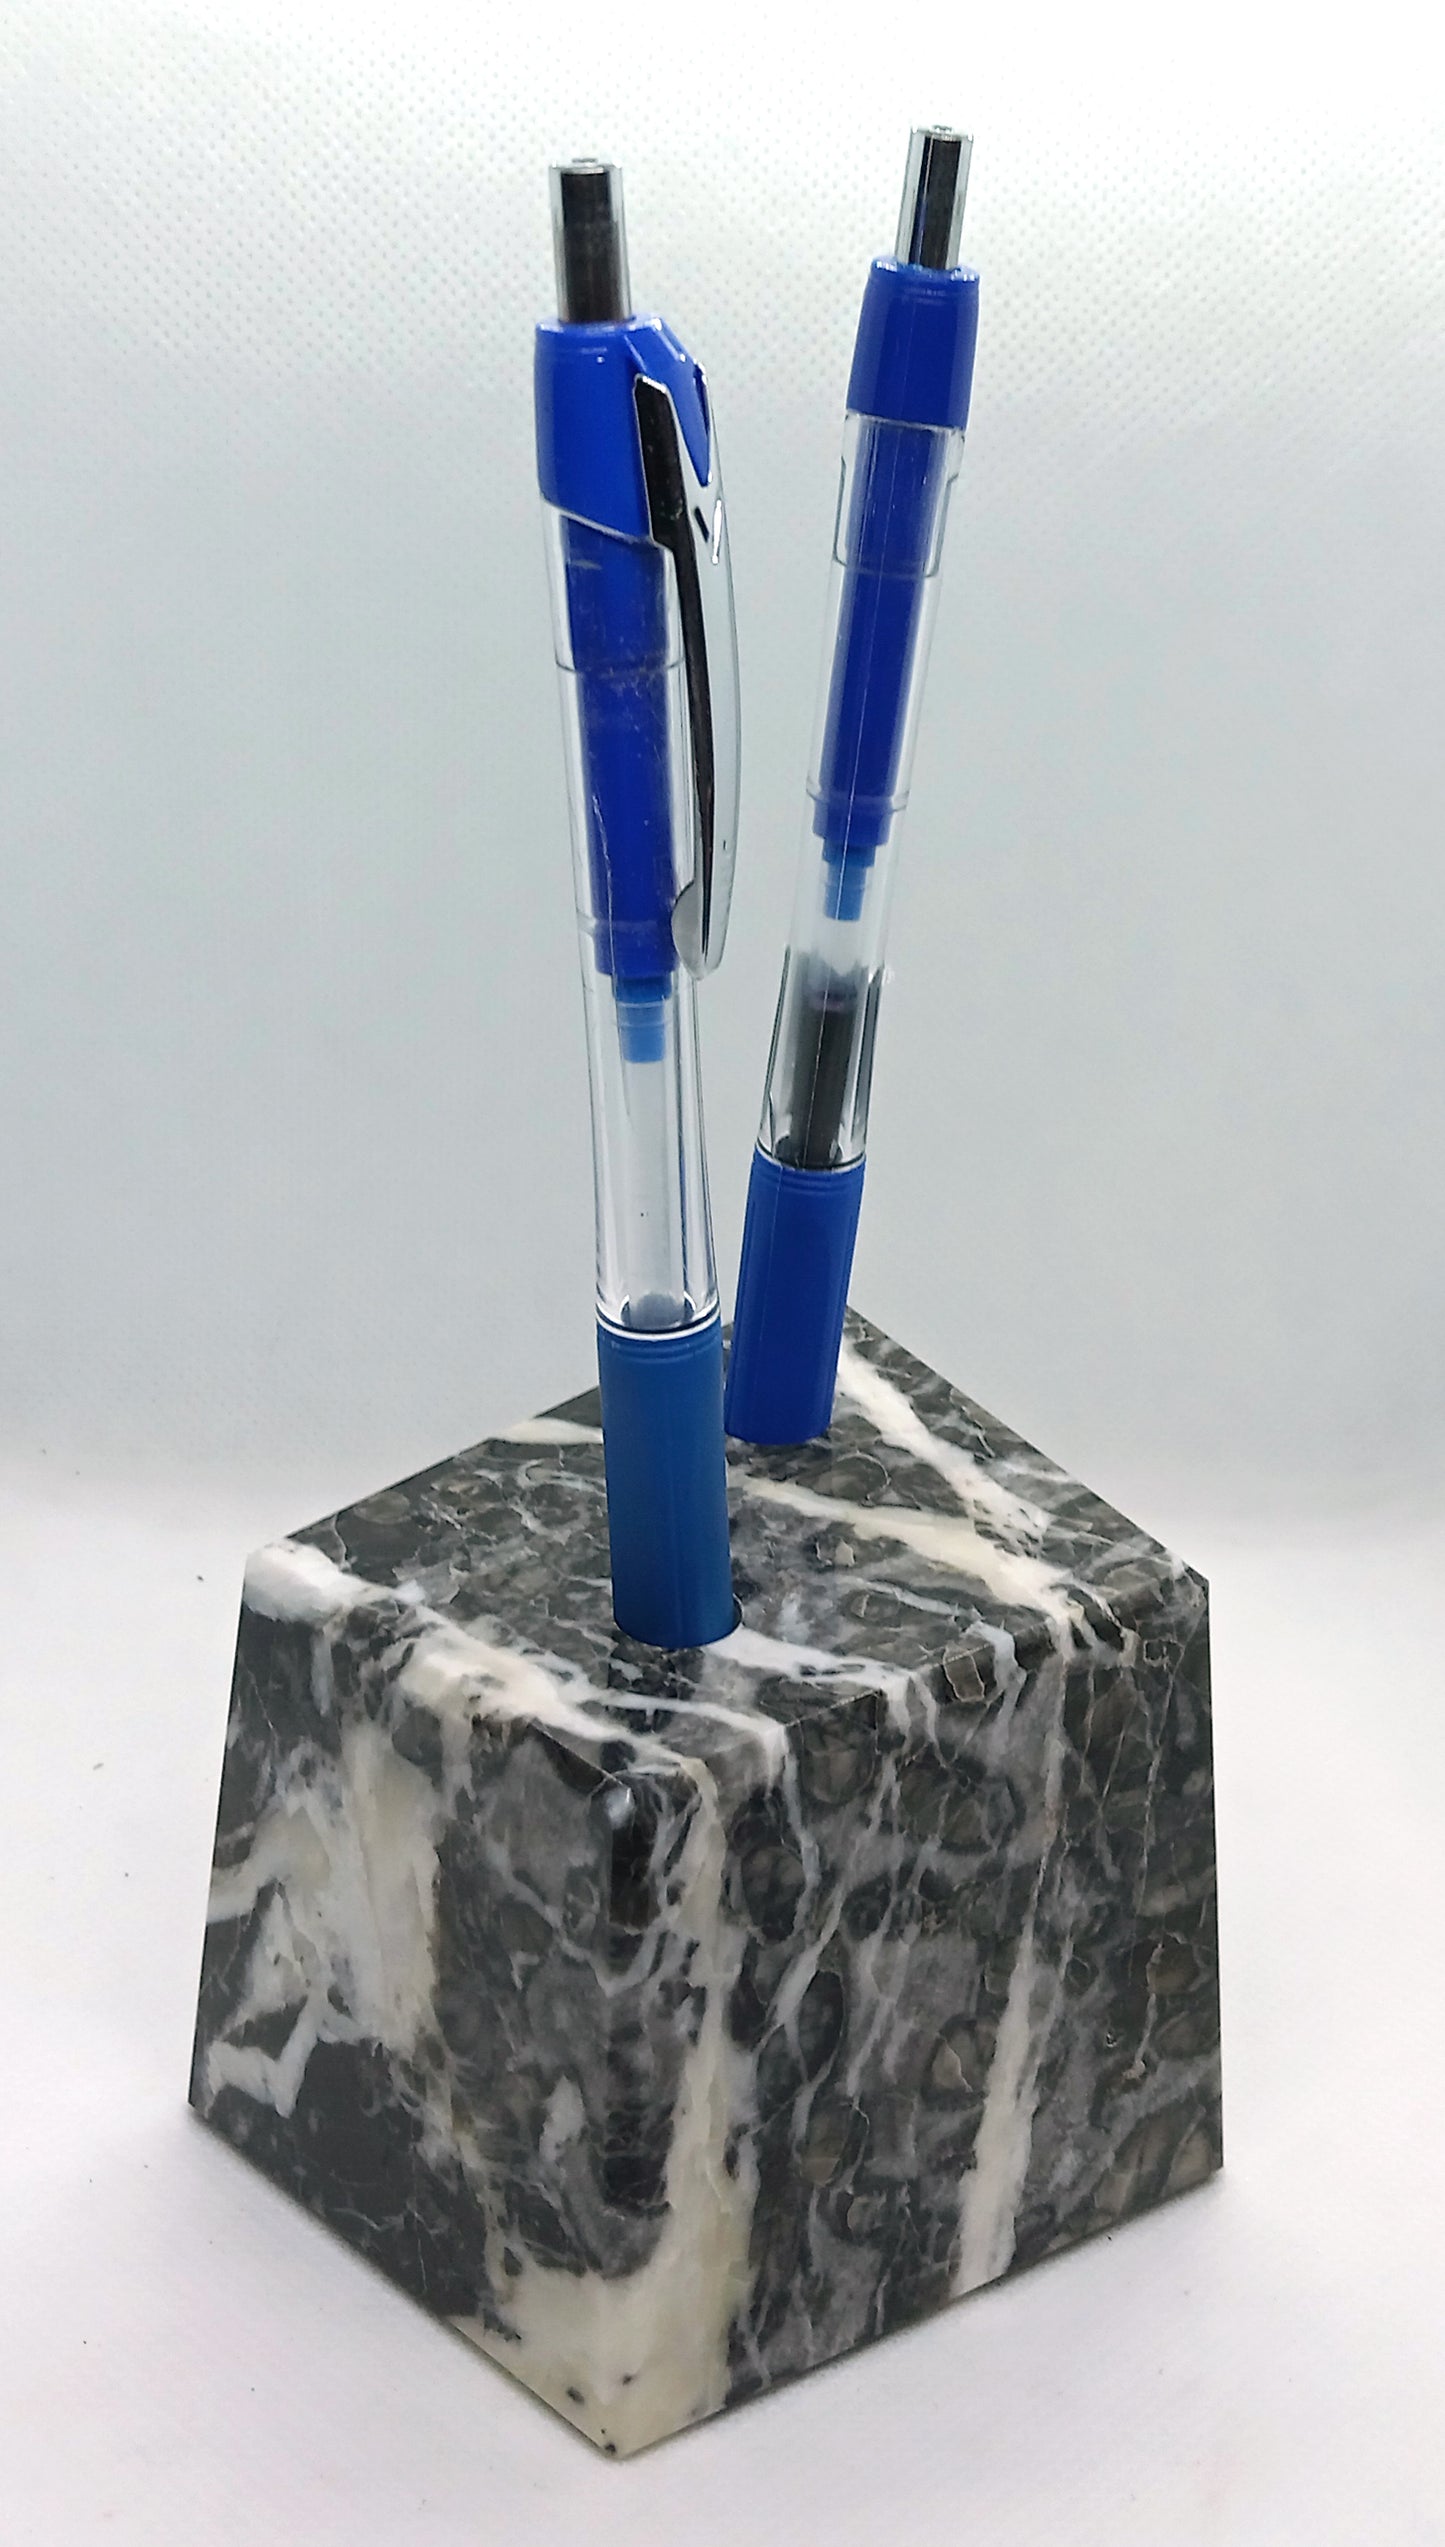 A limestone pencil stand with fossils and calcite veins